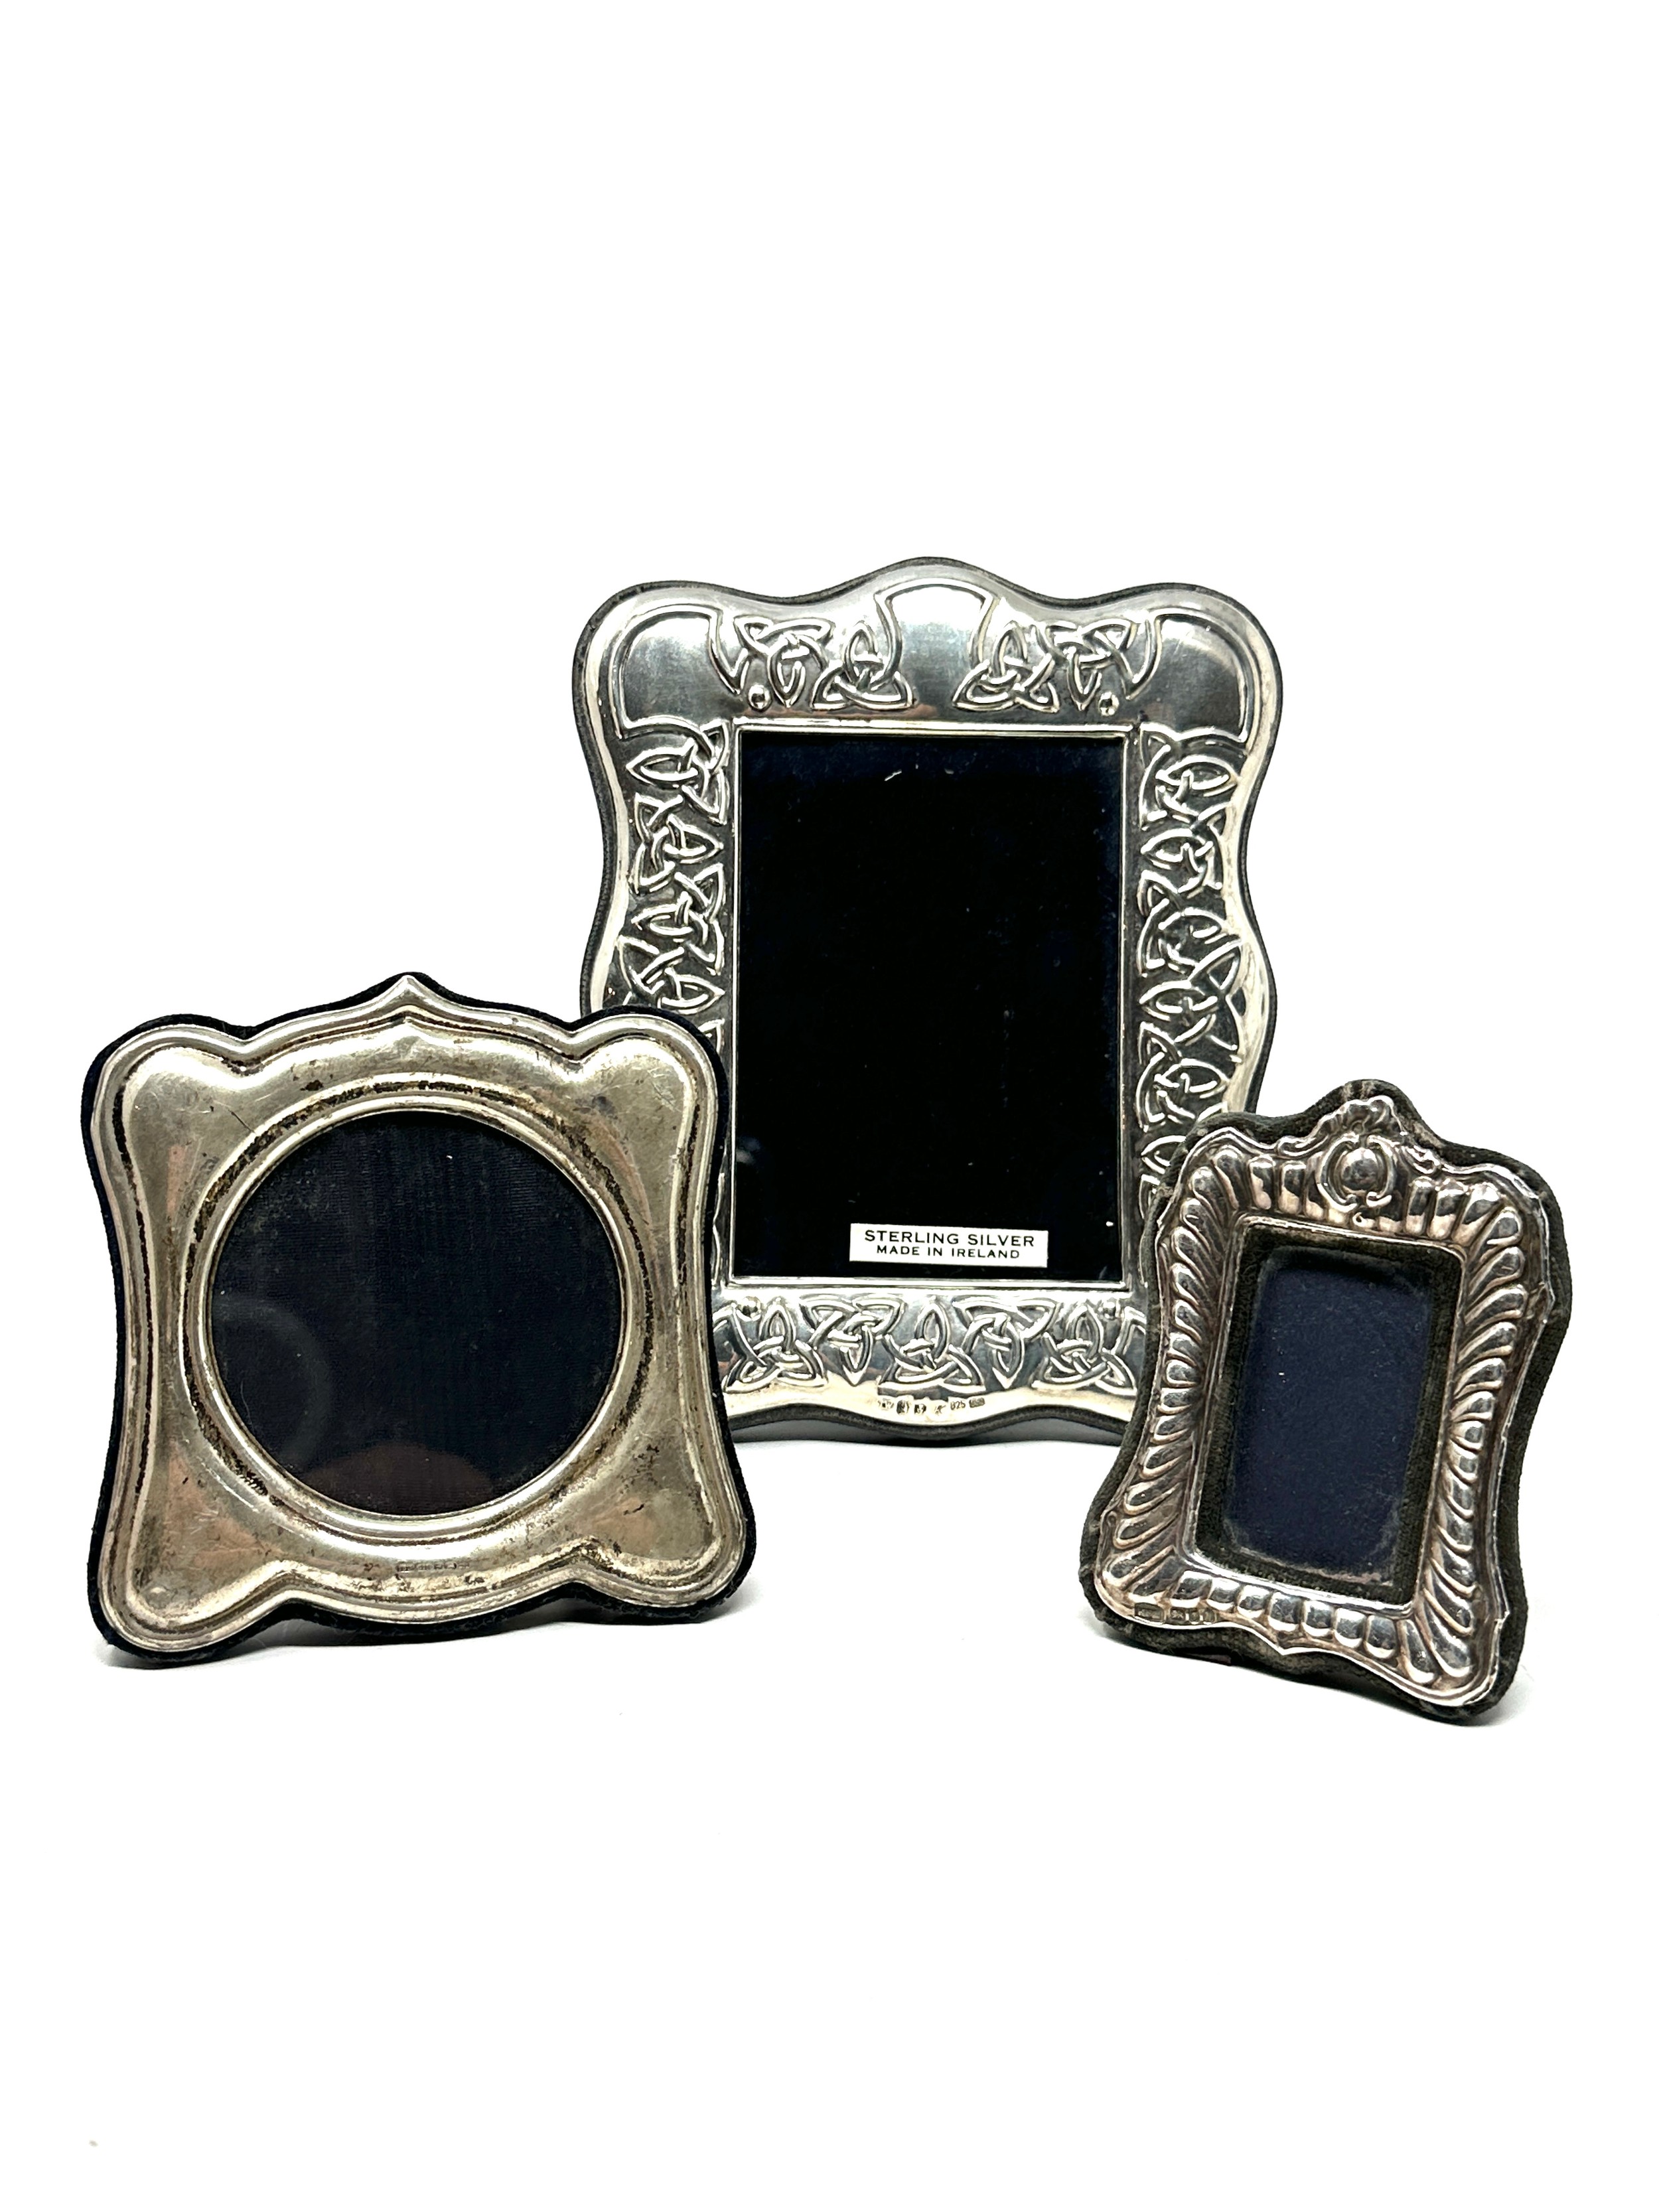 3 silver picture frames largest measures approx 15cm by 12cm - Image 2 of 3